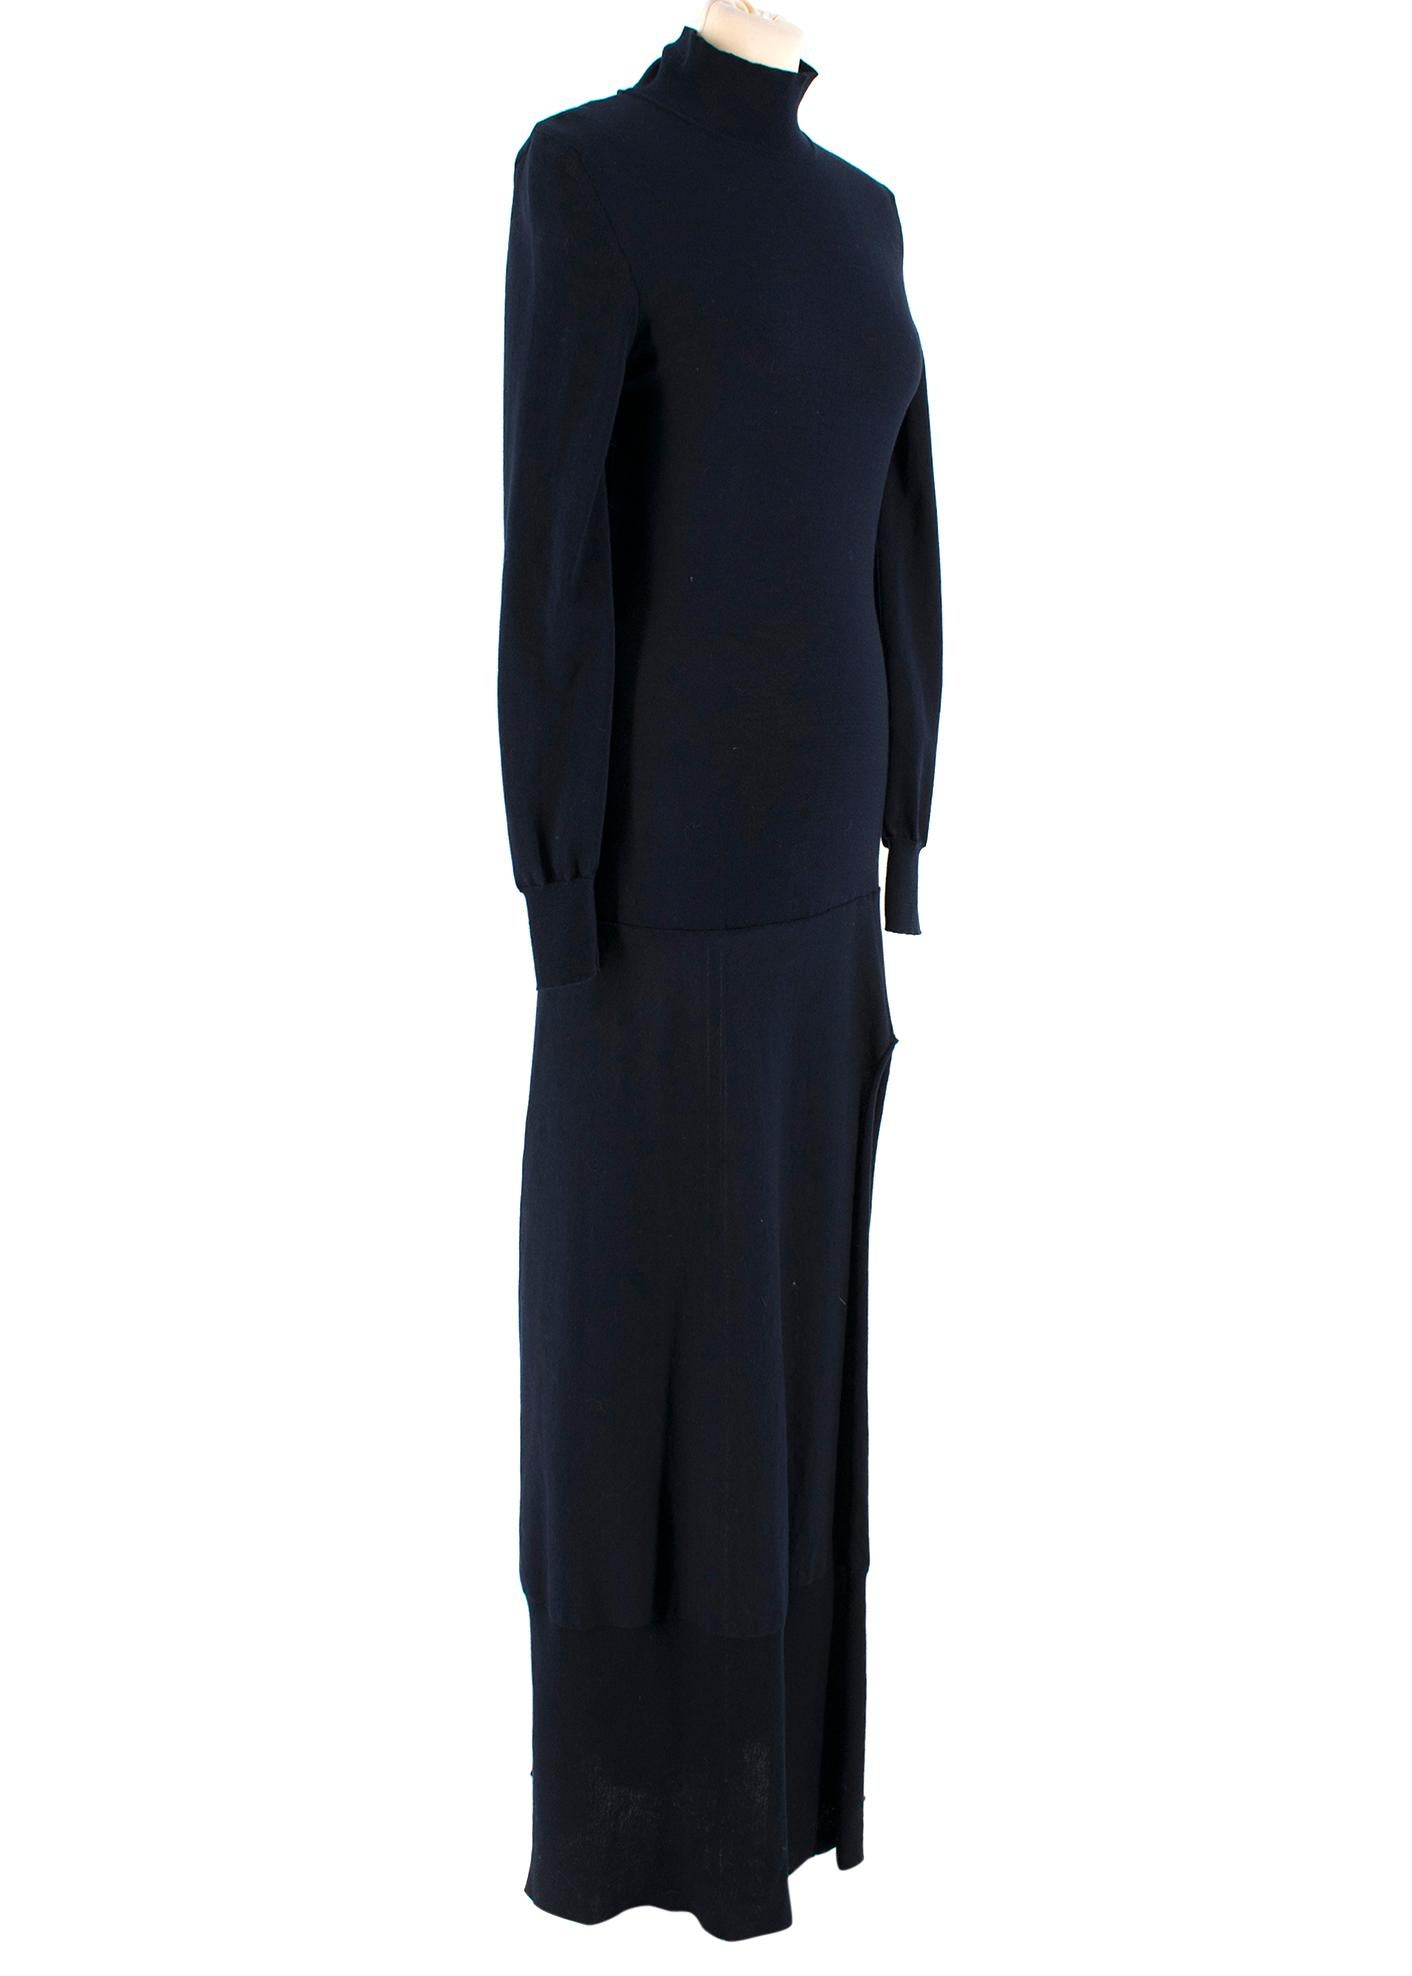 Jacquemus Baya Cutout Cotton-blend Maxi Dress

'La Robe Baya' dress from a navy blue cotton-blend,
Thigh-high split, 
Cutout back,
Long sleeves,
High neck design,
Lightweight knit,


Please note, these items are pre-owned and may show some signs of